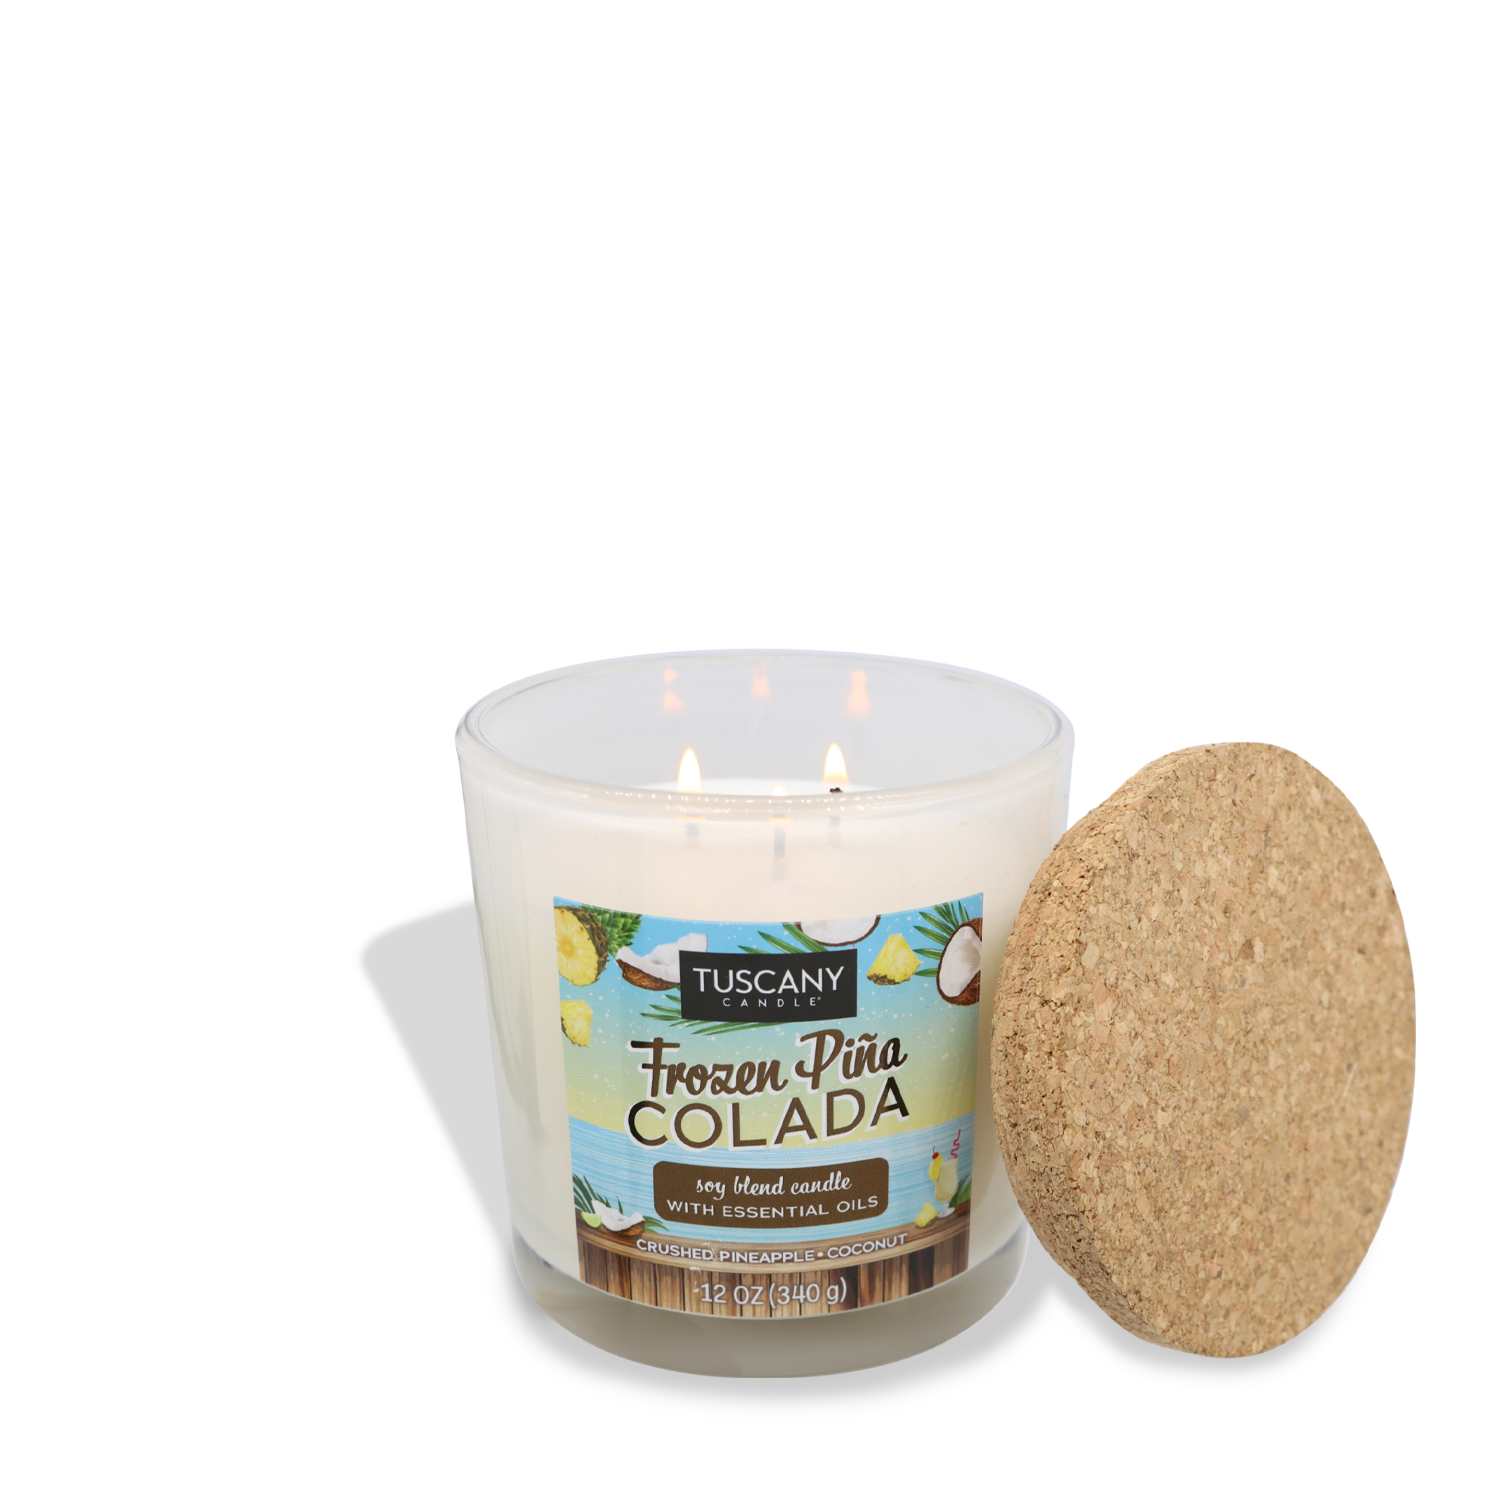 A lit candle in a clear glass jar labeled "Tuscany Candle® SEASONAL Frozen Pina Colada (12 oz) – Sunset Beach Bar Collection." The jar is next to a cork lid with tropical graphics, evoking the scent of soft coconut and crushed pineapple that transports you to a tropical paradise.